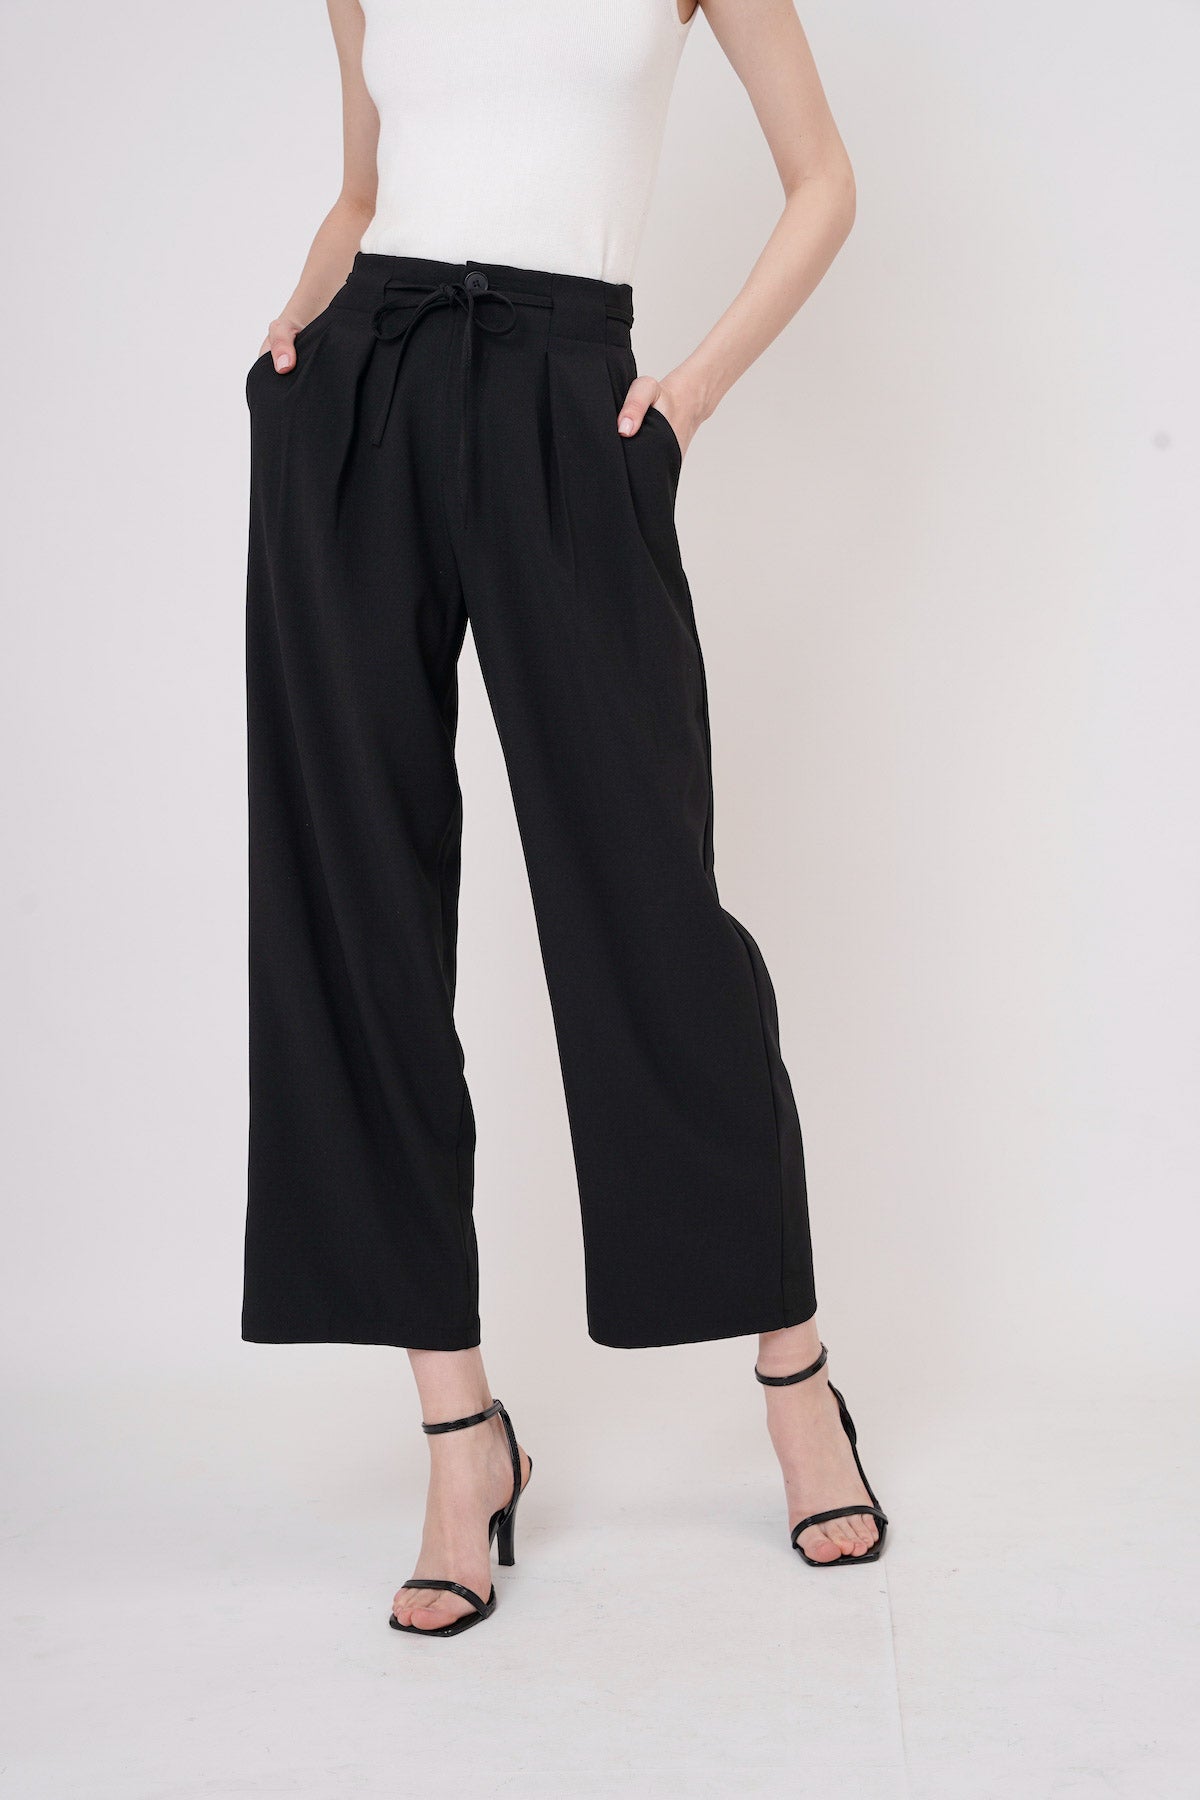 Cooper High-Waist Belted Pants In Black